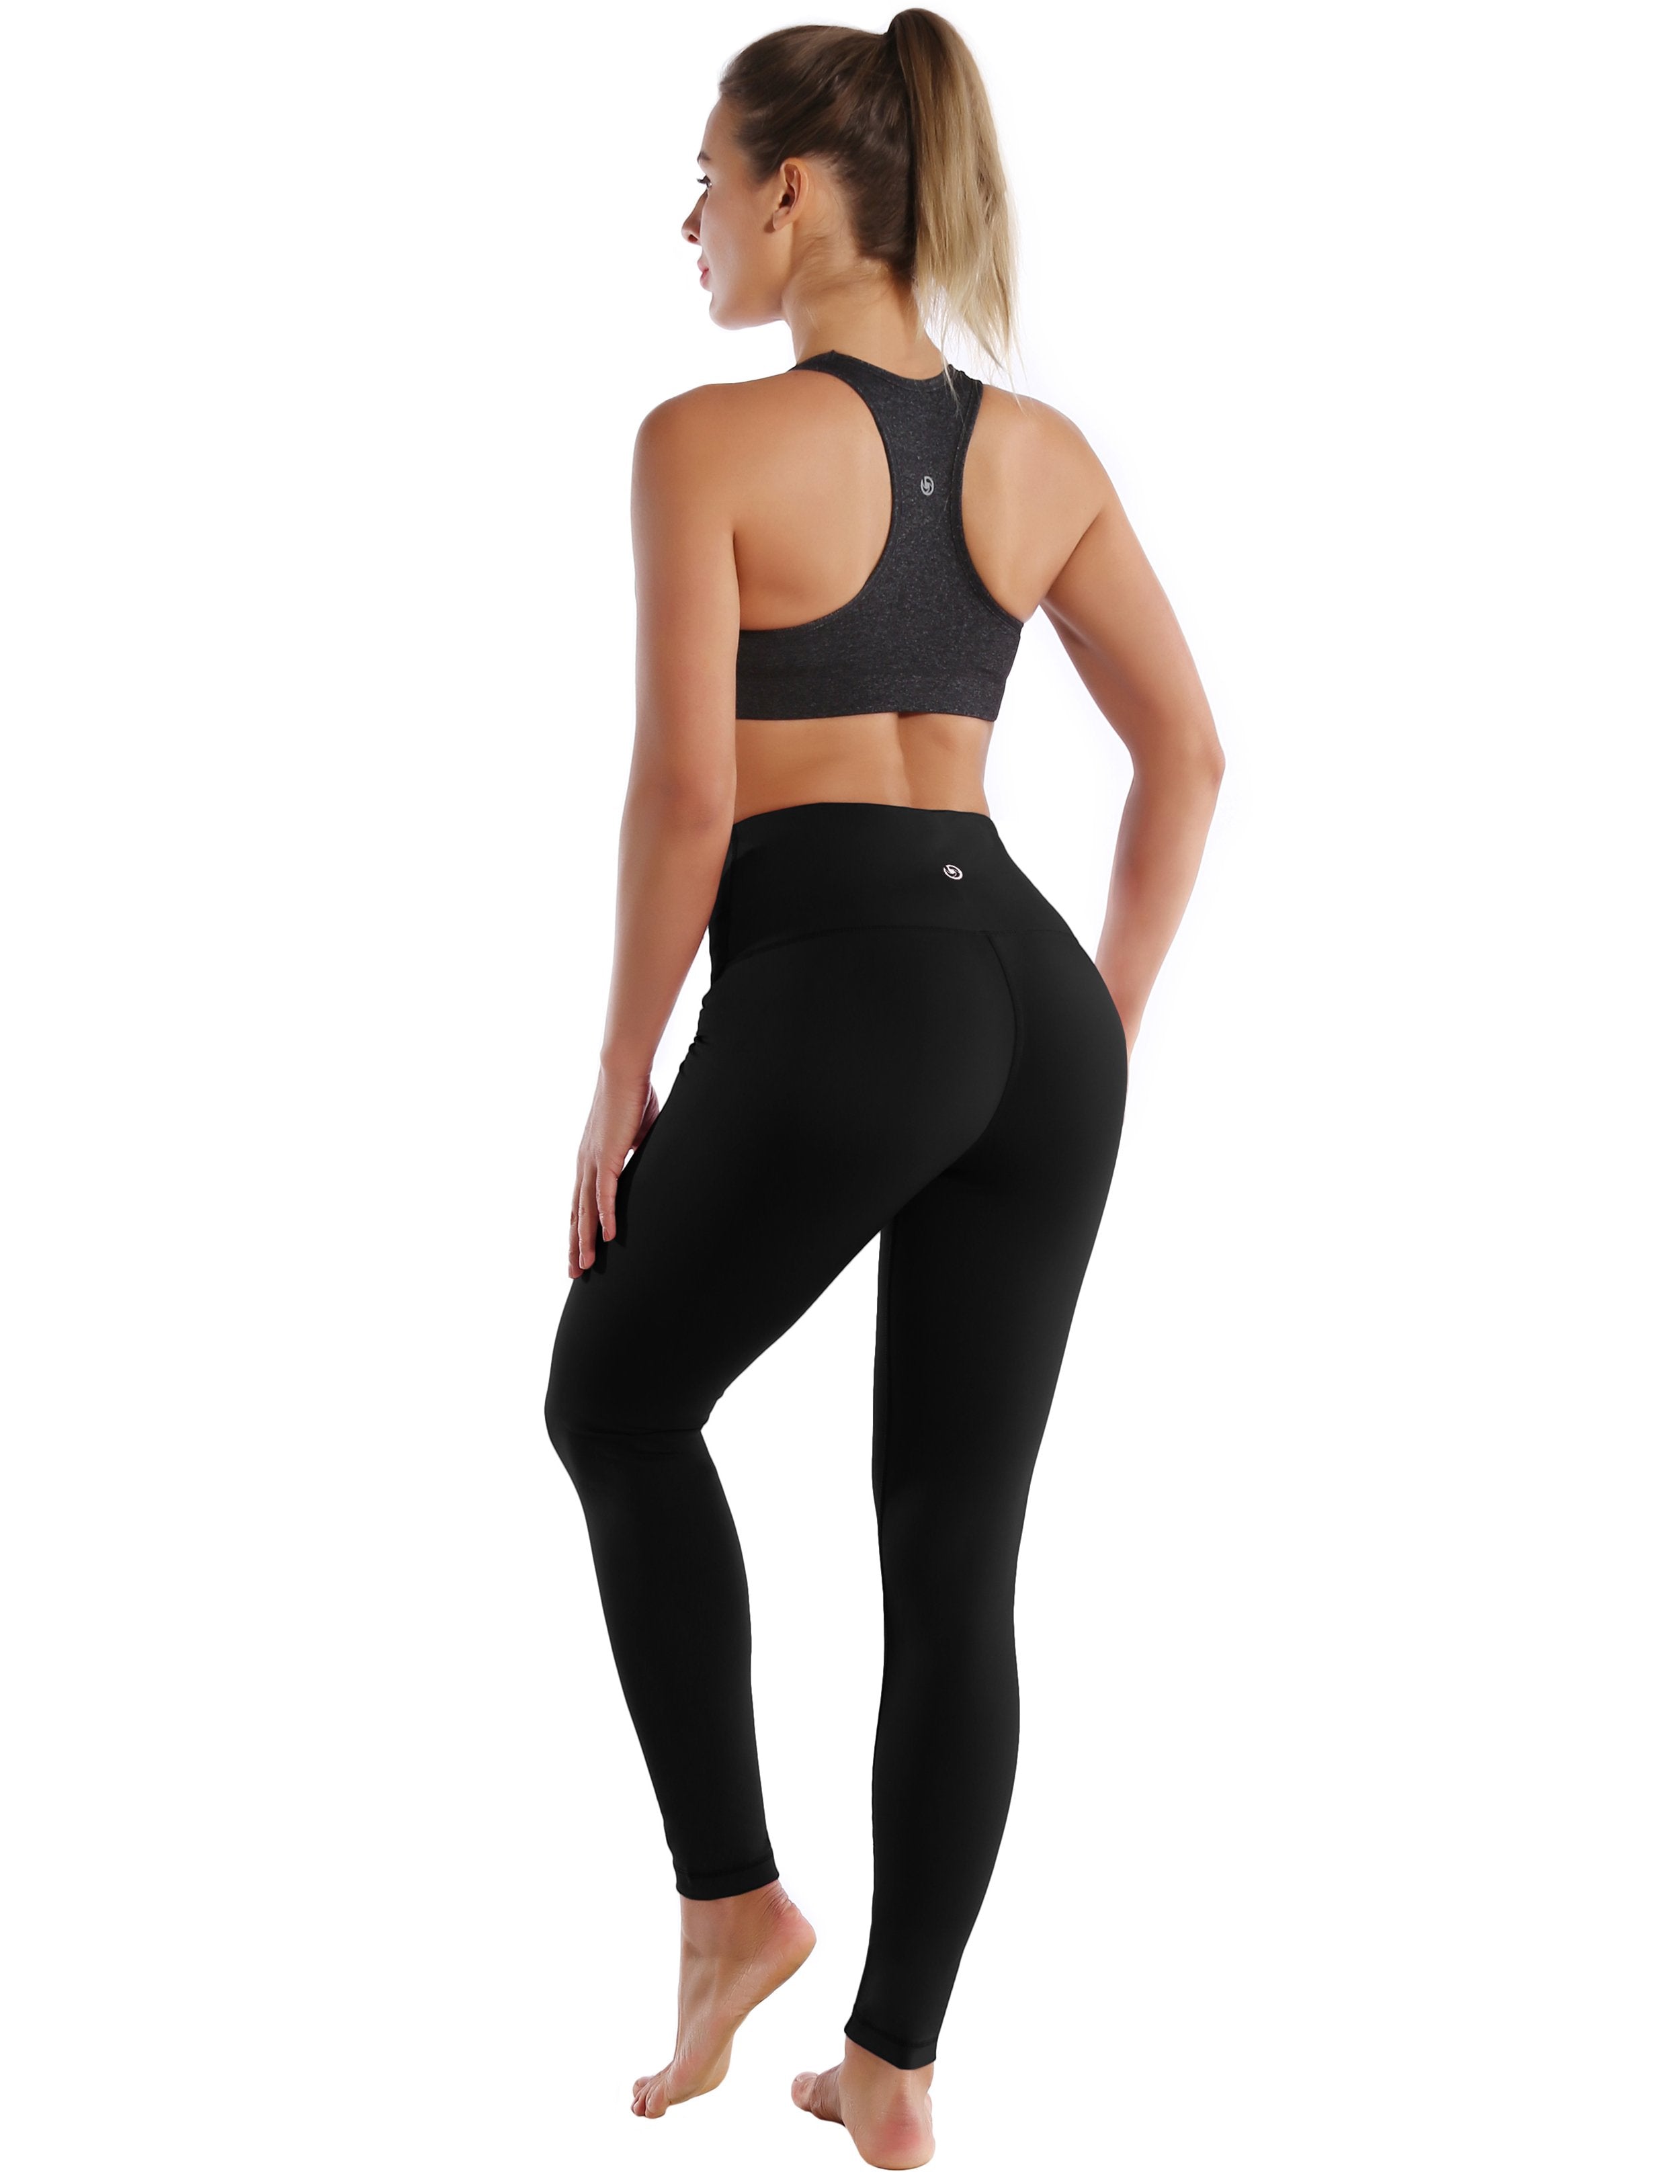 BUBBLELIME 4 Styles Petite/Tall Women's High Waist Yoga Leggings Over The  Heel Soft Tummy Control Extra Long Workout Pants